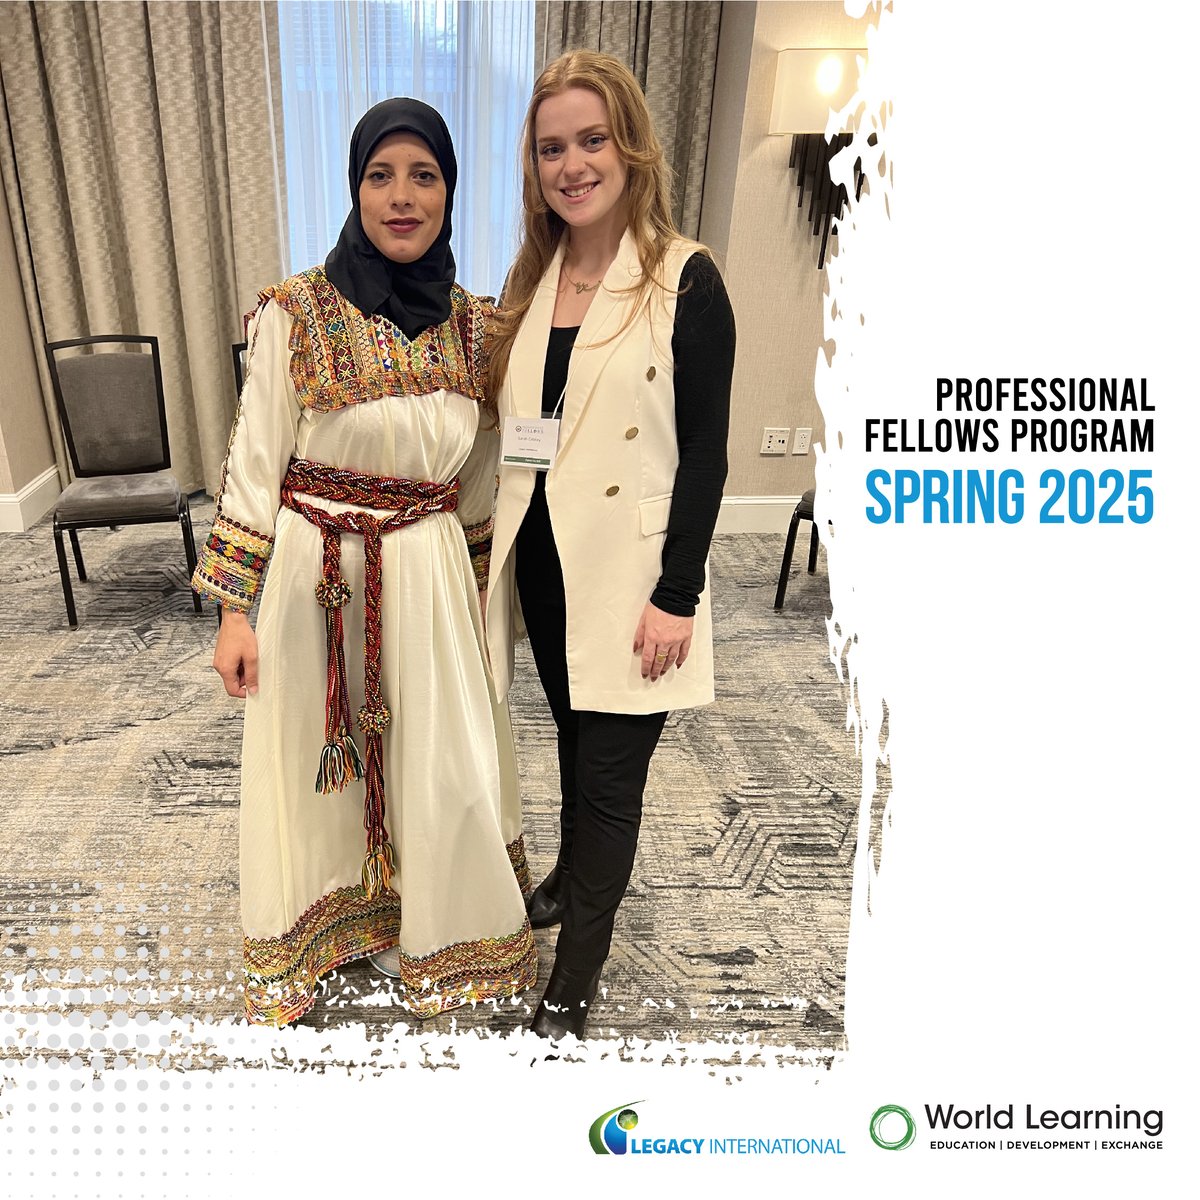 The application for the Spring 2025 Professional Fellows Program (PFP) is still open!
📌The deadline to apply for PFP is May 15, 2024. To learn more about the program and to apply, click here: legacyintl.org/pfp/
Exchange Programs - U.S. Department of State

#ProFellows